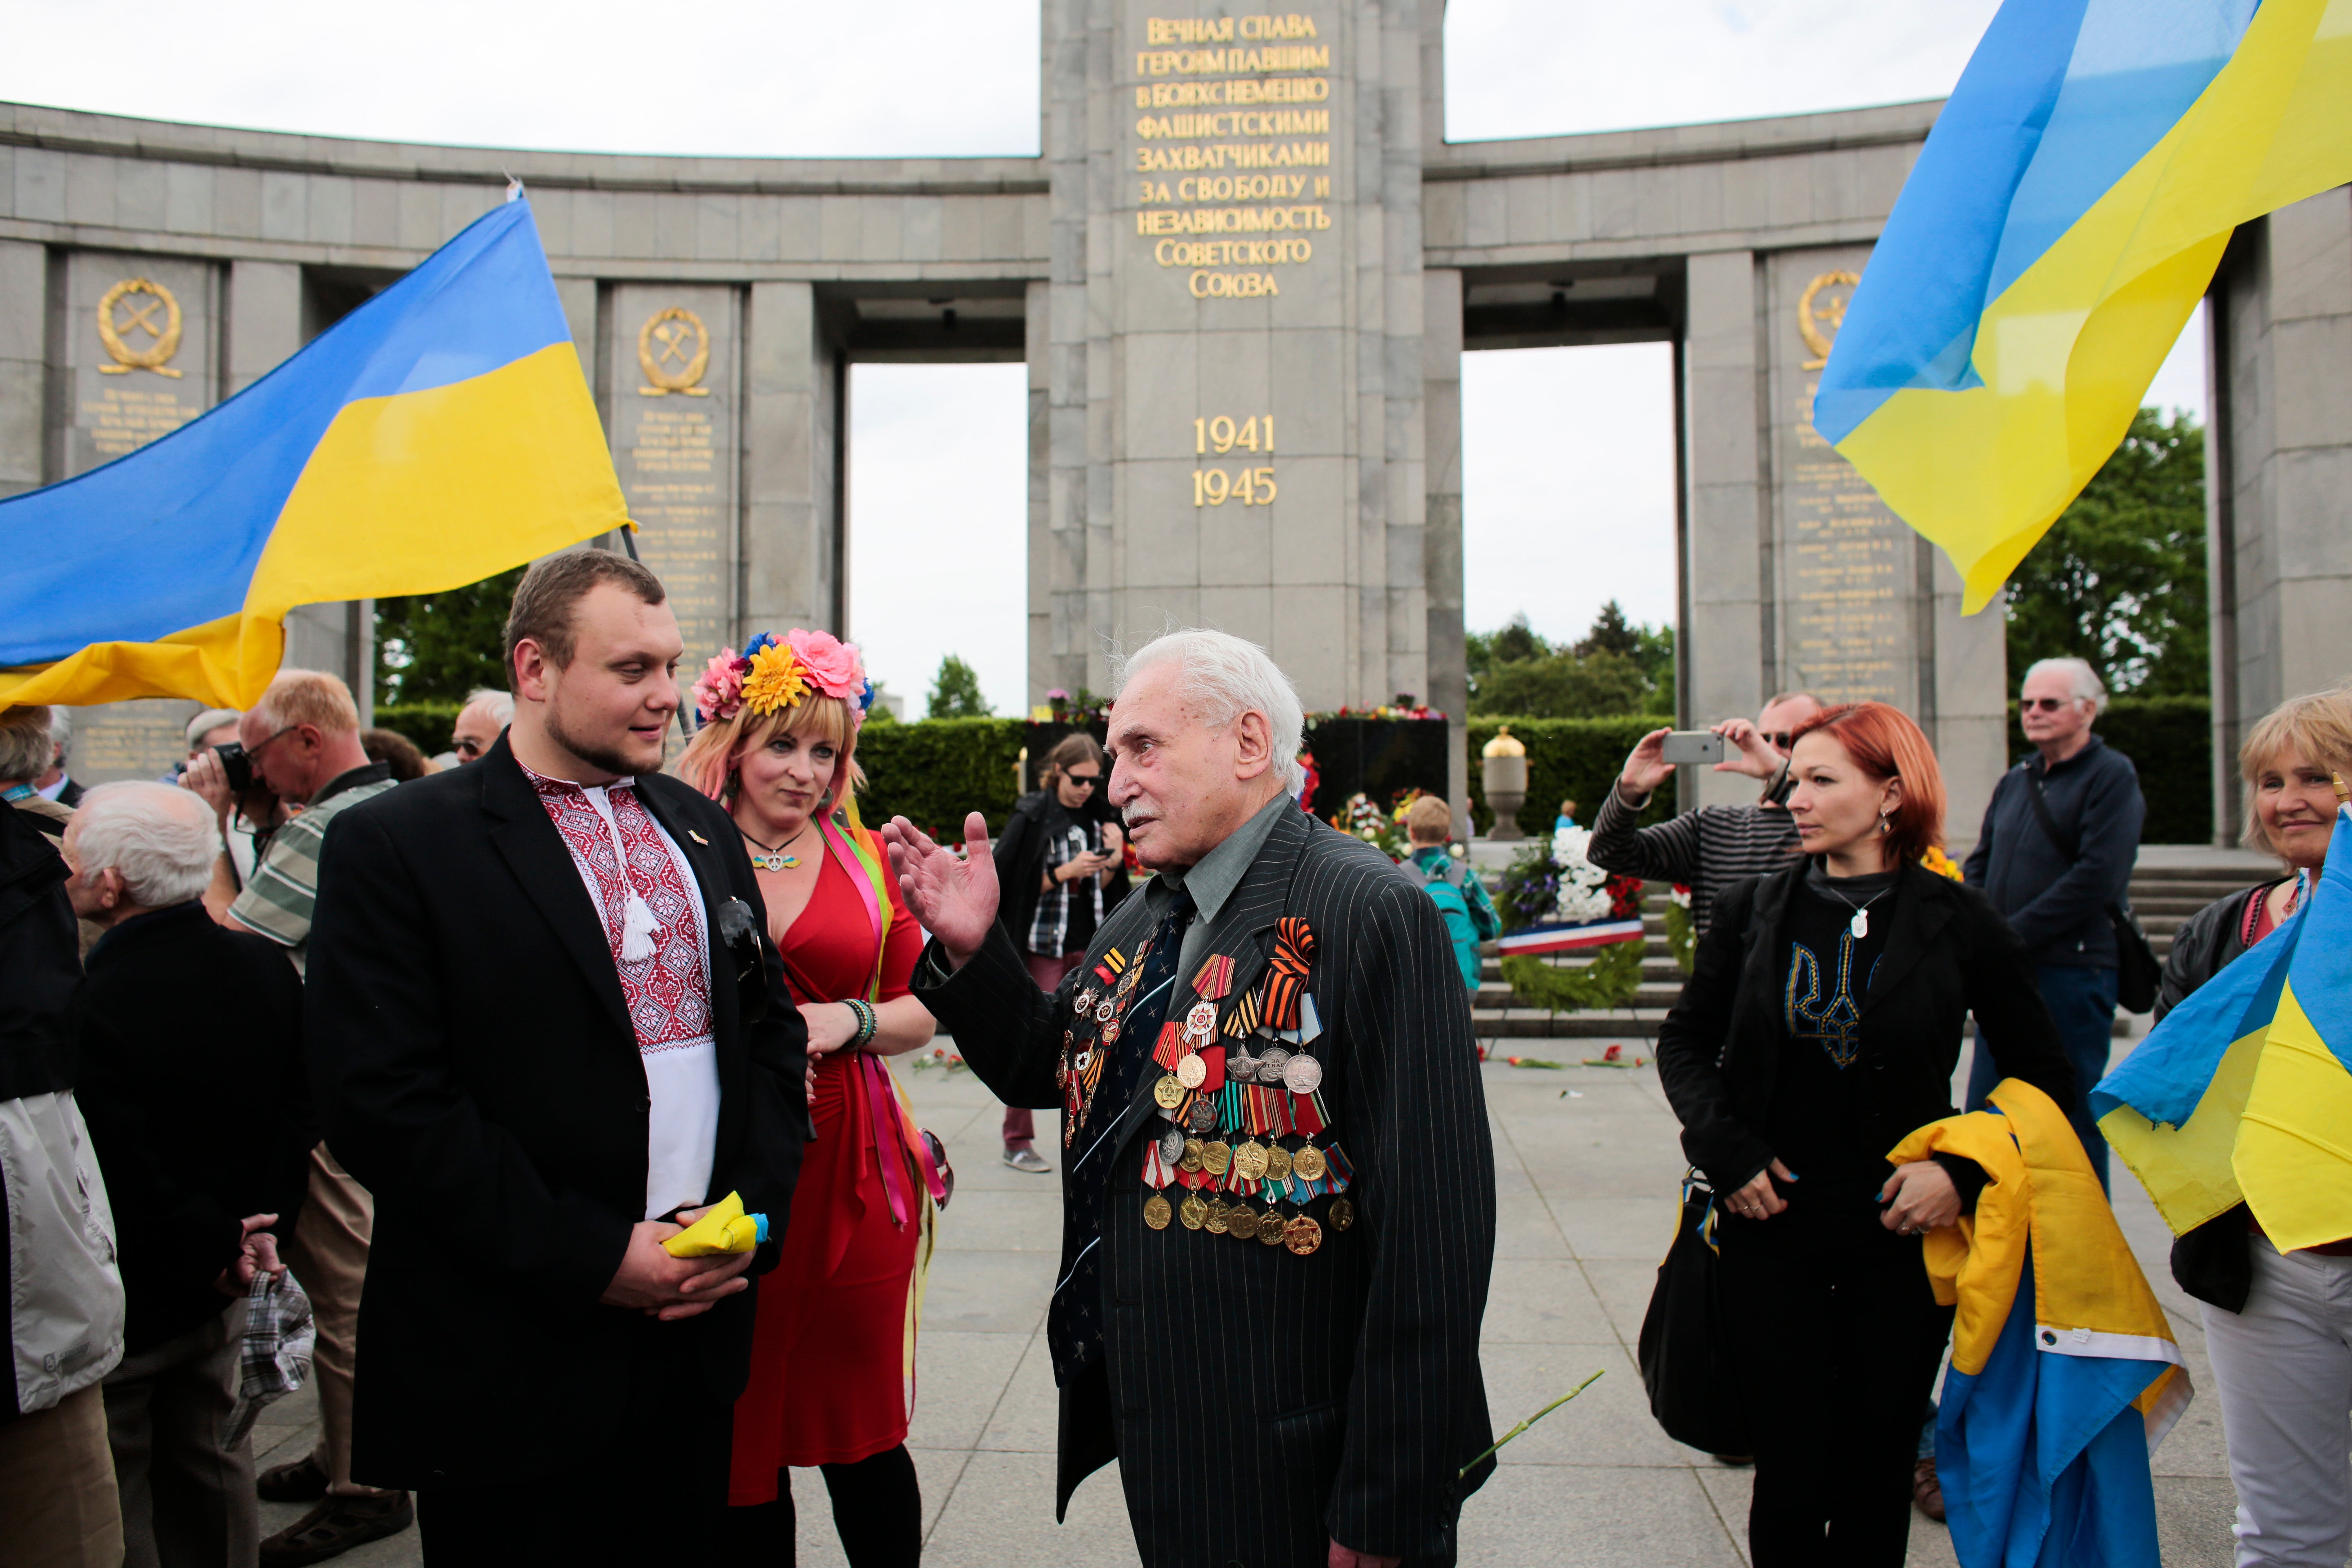 File: In this Friday, 8 May 2015 file photo, Soviet war veteran David Dushman, 92, center, speaks to people holding Ukrainian flags as he attends a wreath laying ceremony at the Russian War Memorial in the Tiergarten district of Berlin, Germany